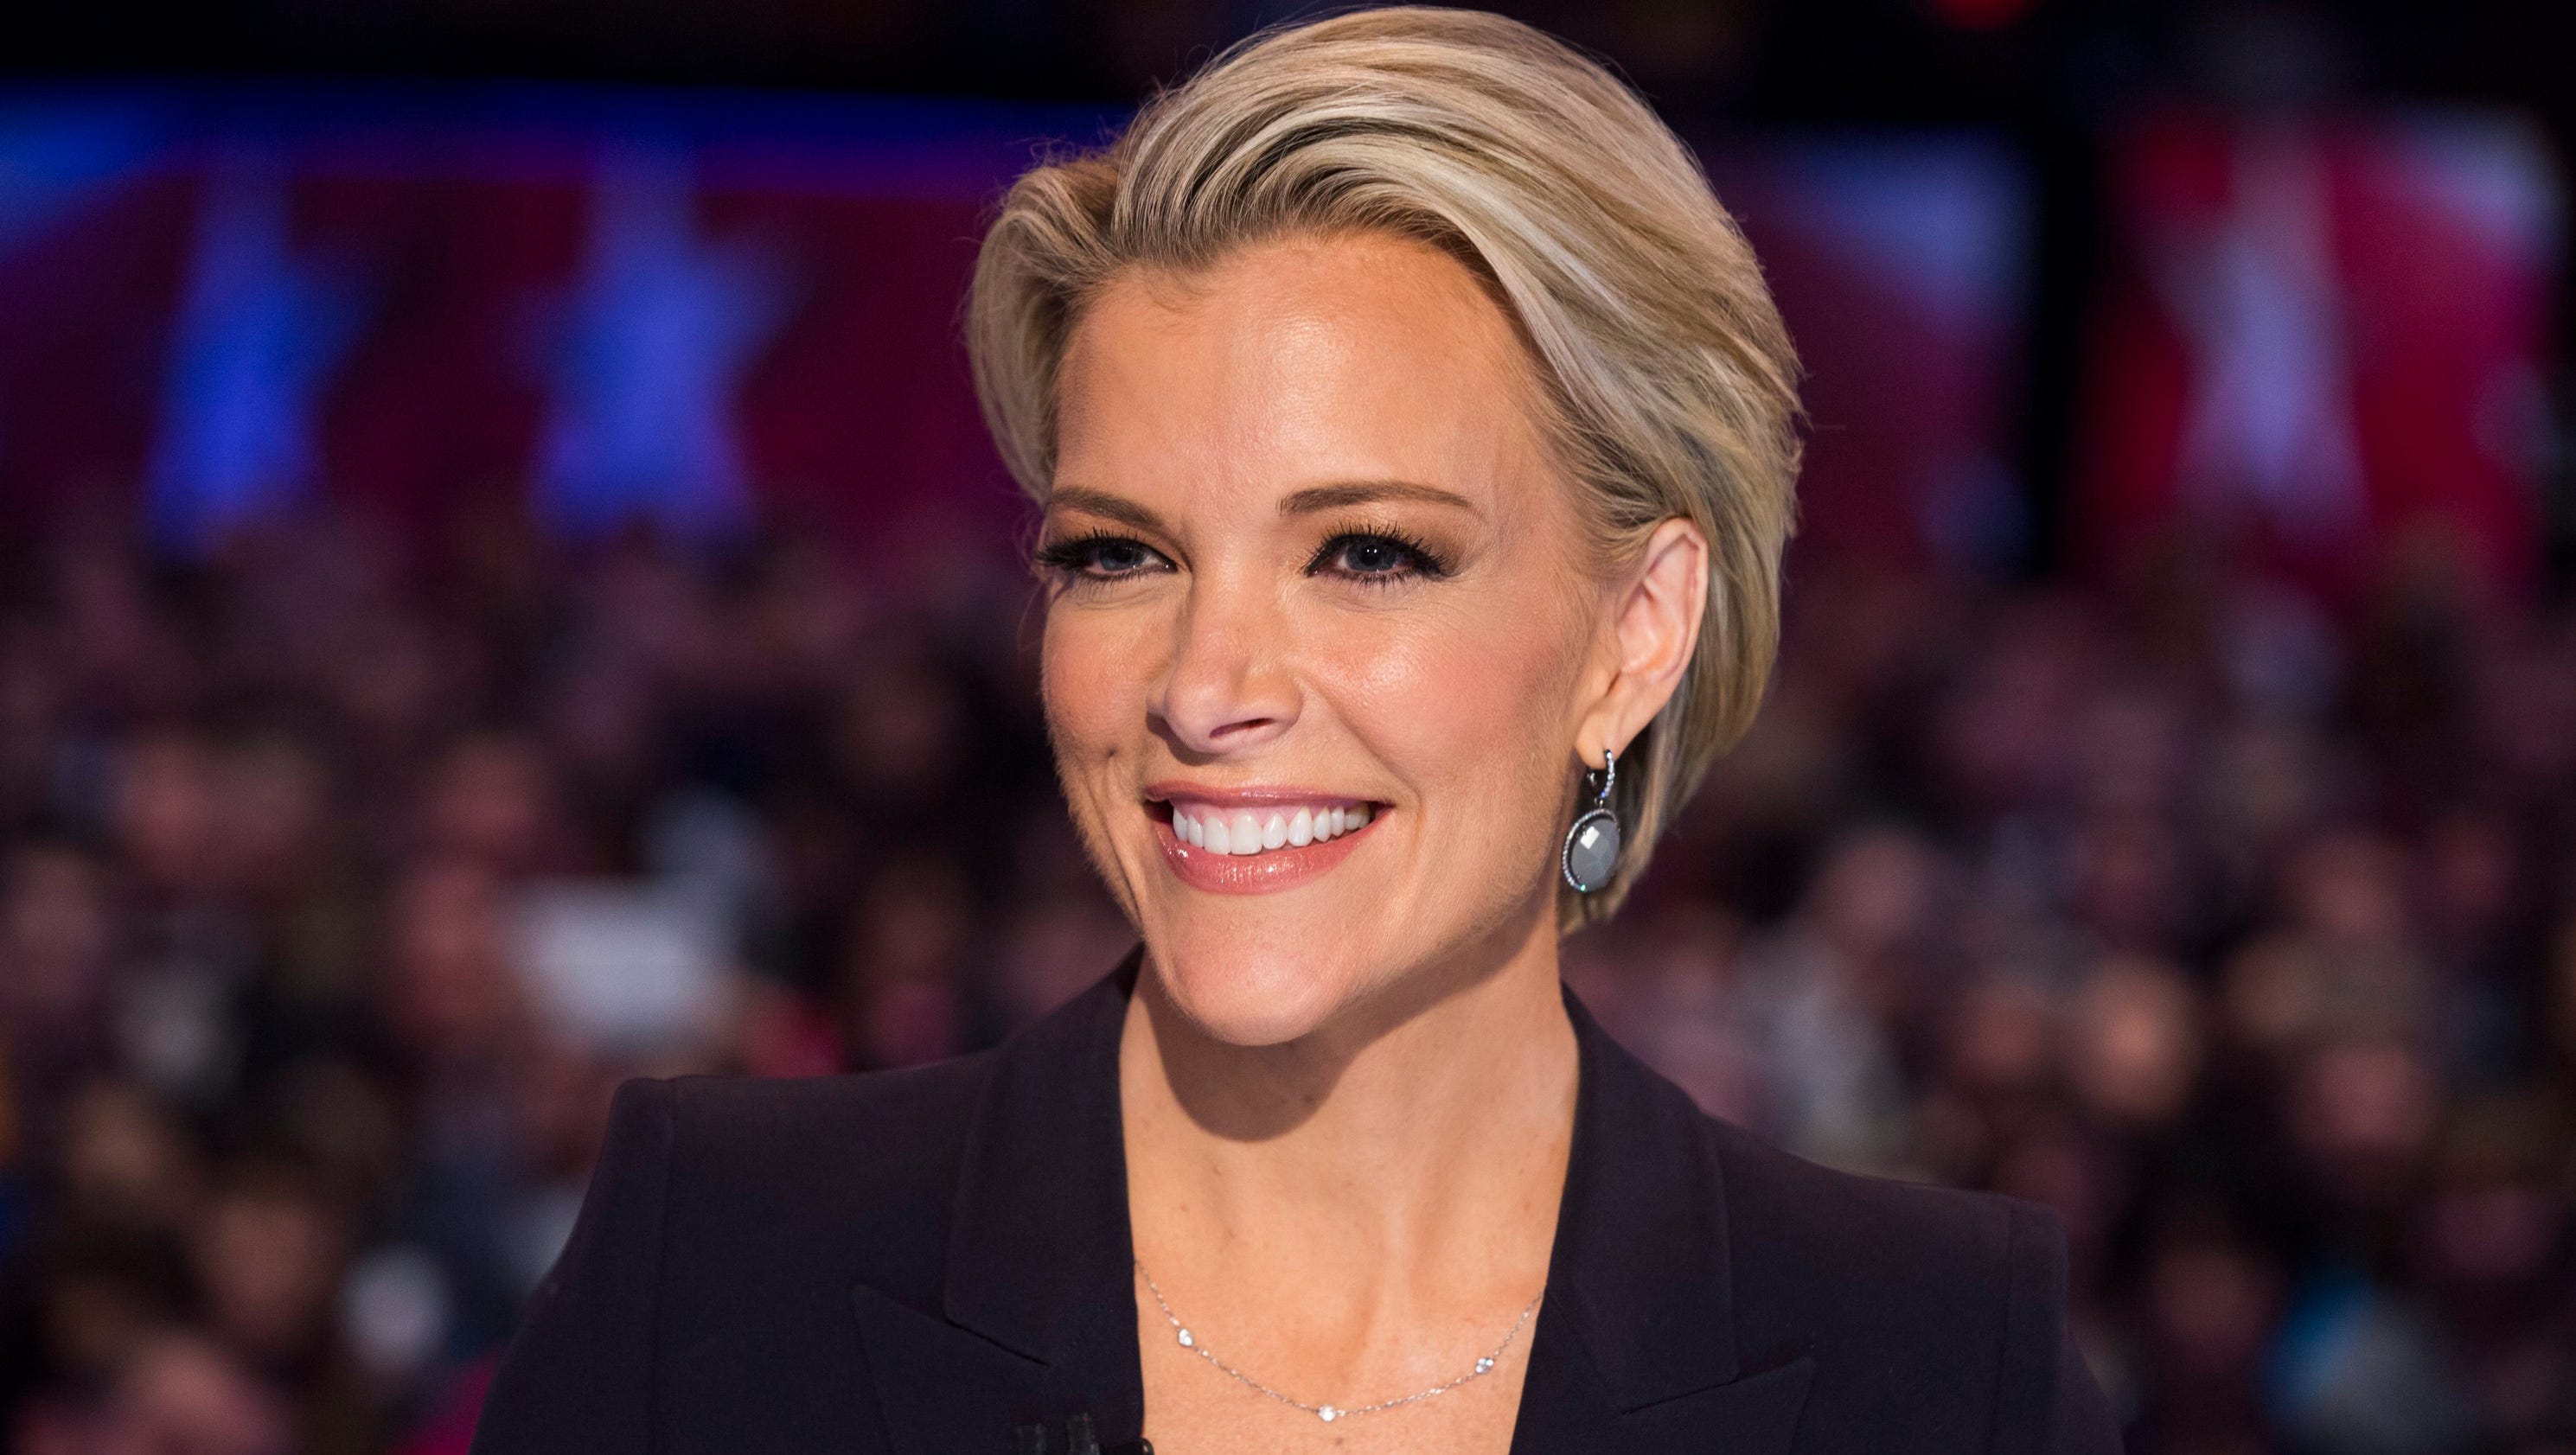 Report: Upcoming Megyn Kelly book details sexual harassment by Roger Ailes